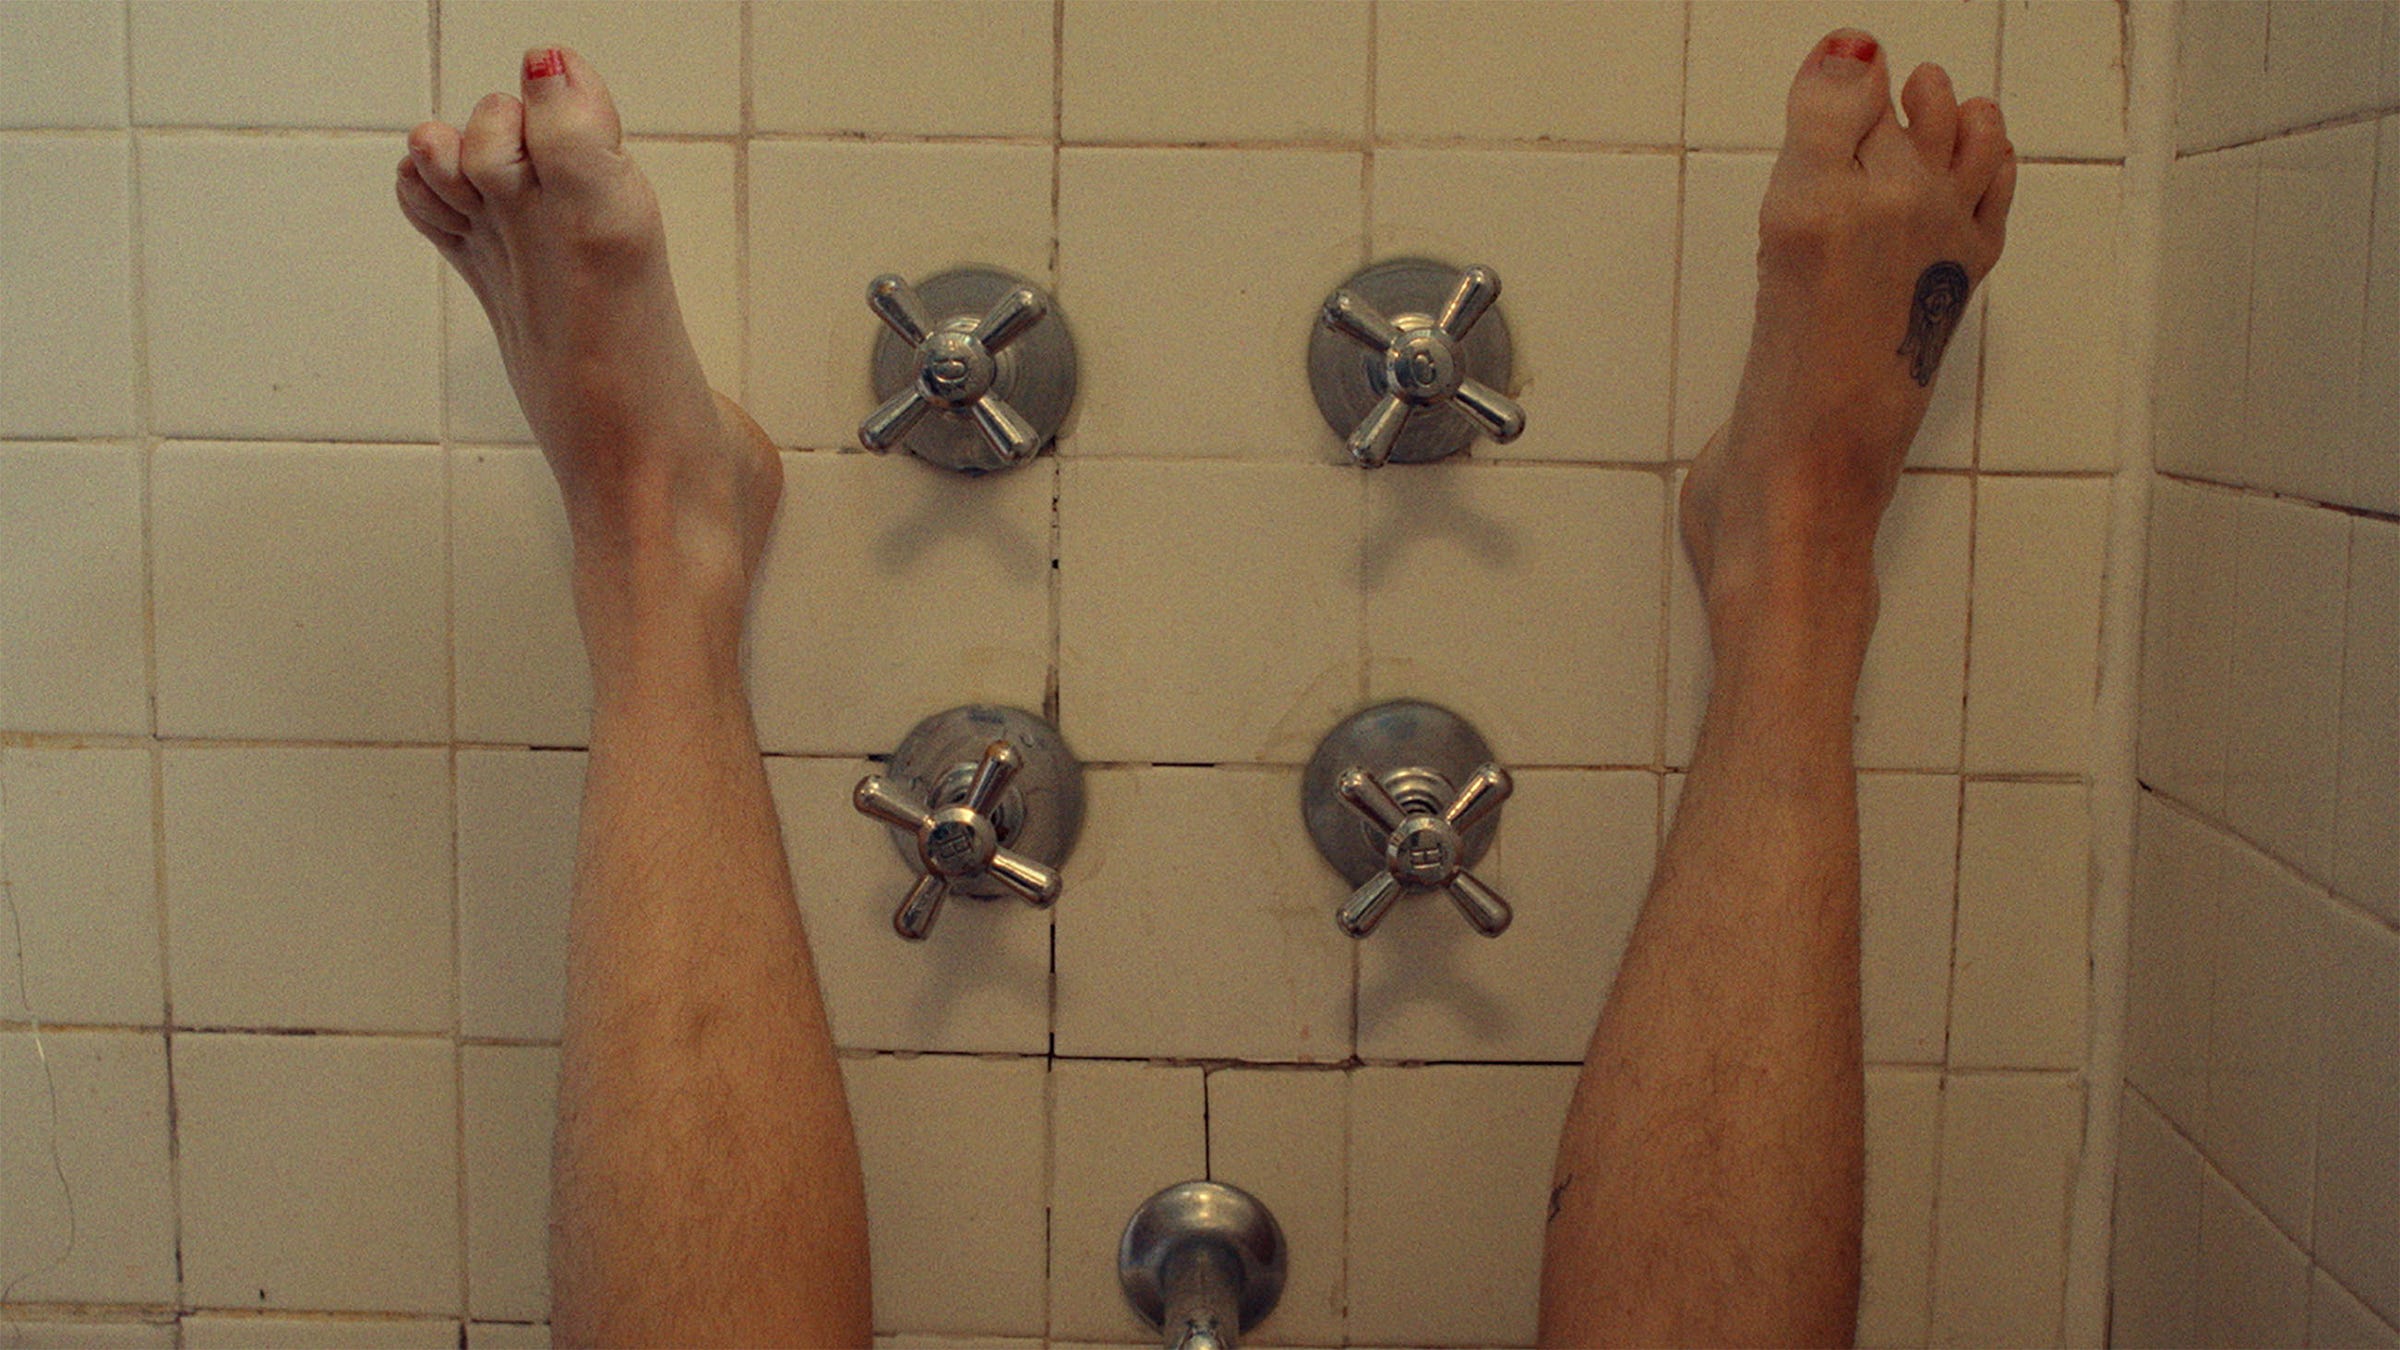 A woman's feet propped up against the wall of a bathroom, with her toes clenching